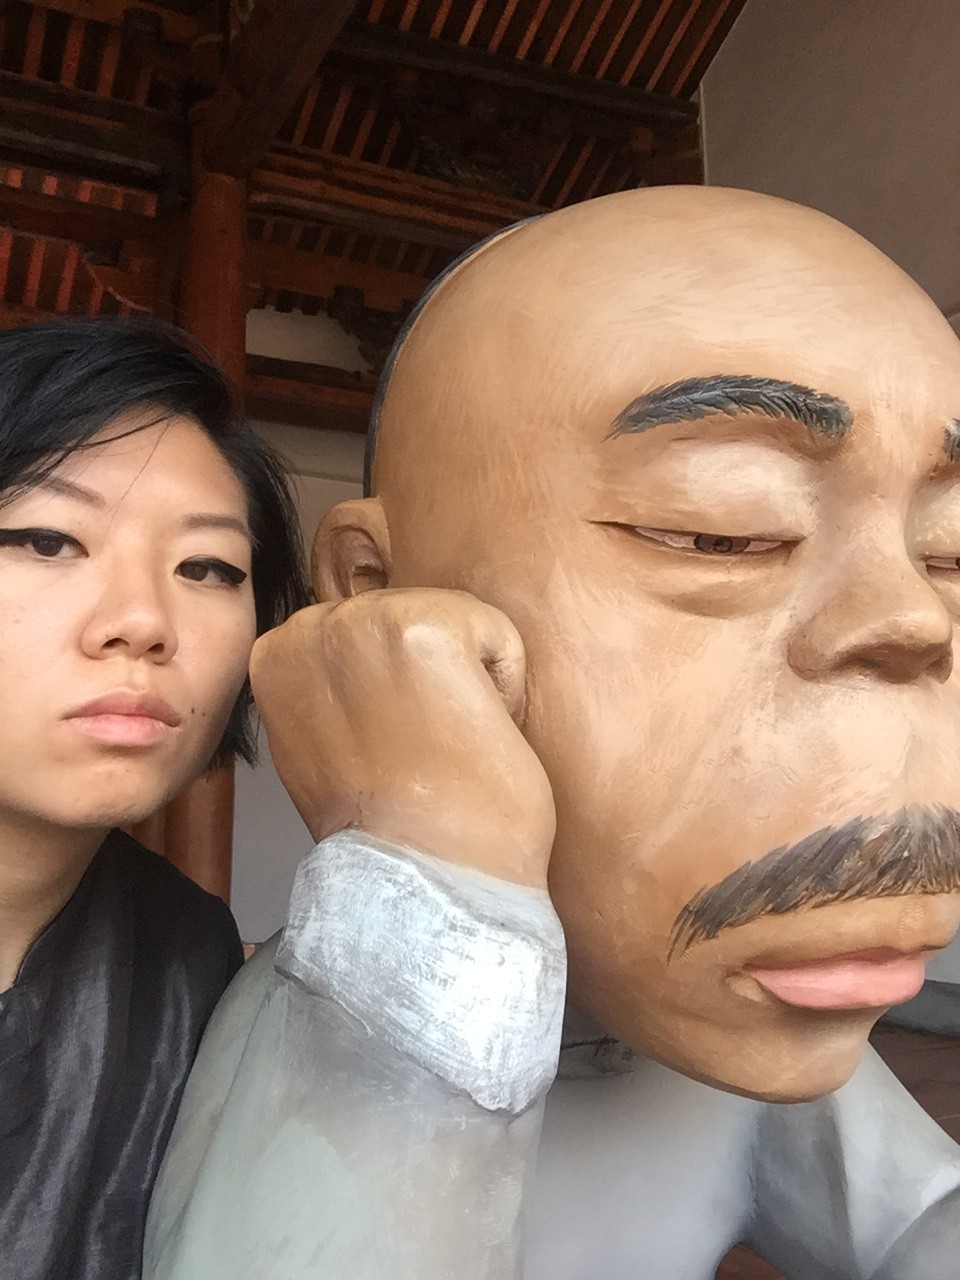 Cindy Gao is to the left of the image, facing the camera. Cindy is standing next to a sculpture of a bald man with a moustache, resting his cheek on his fist.